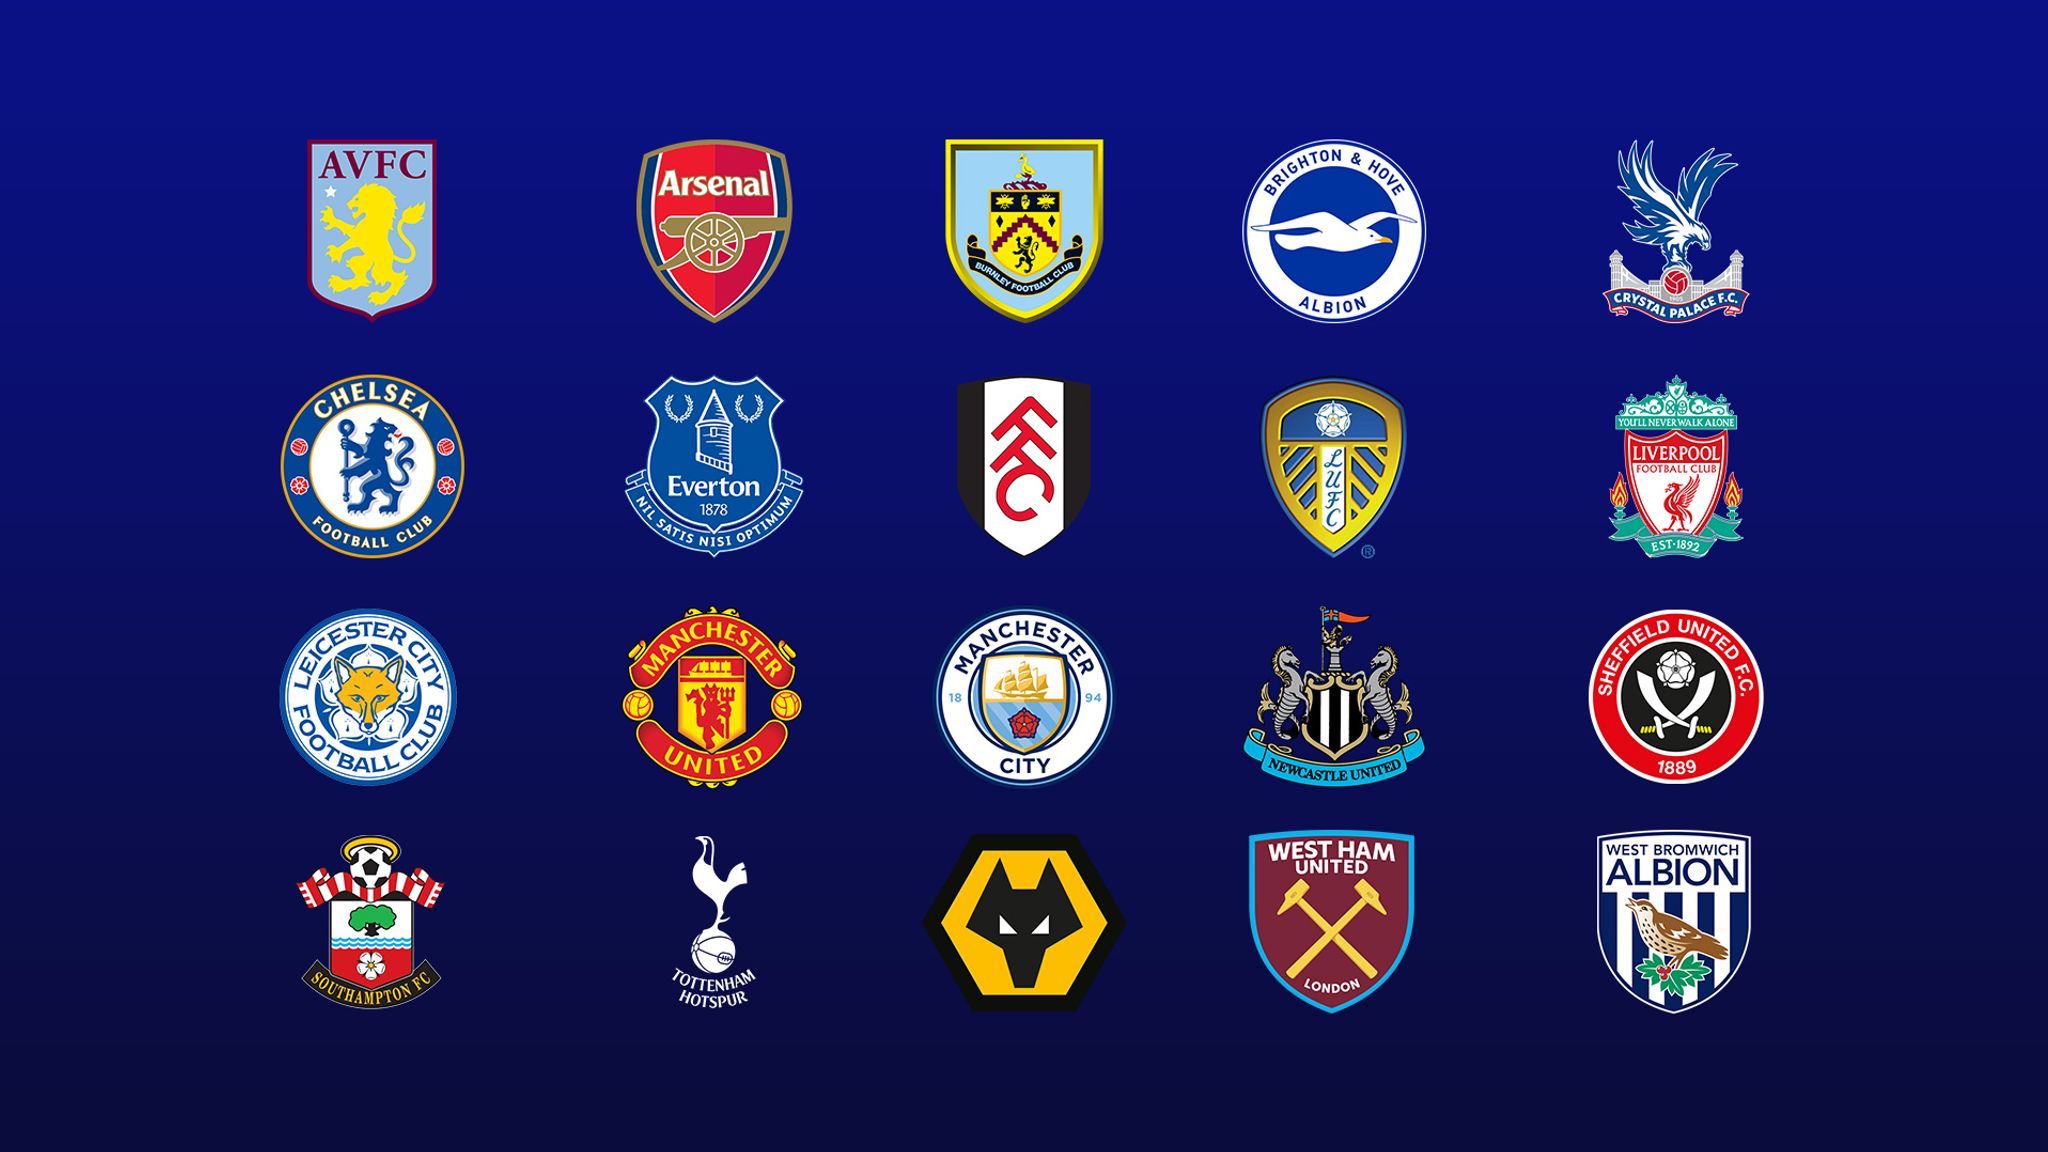 The badges of this season's League One clubs. Which do you think